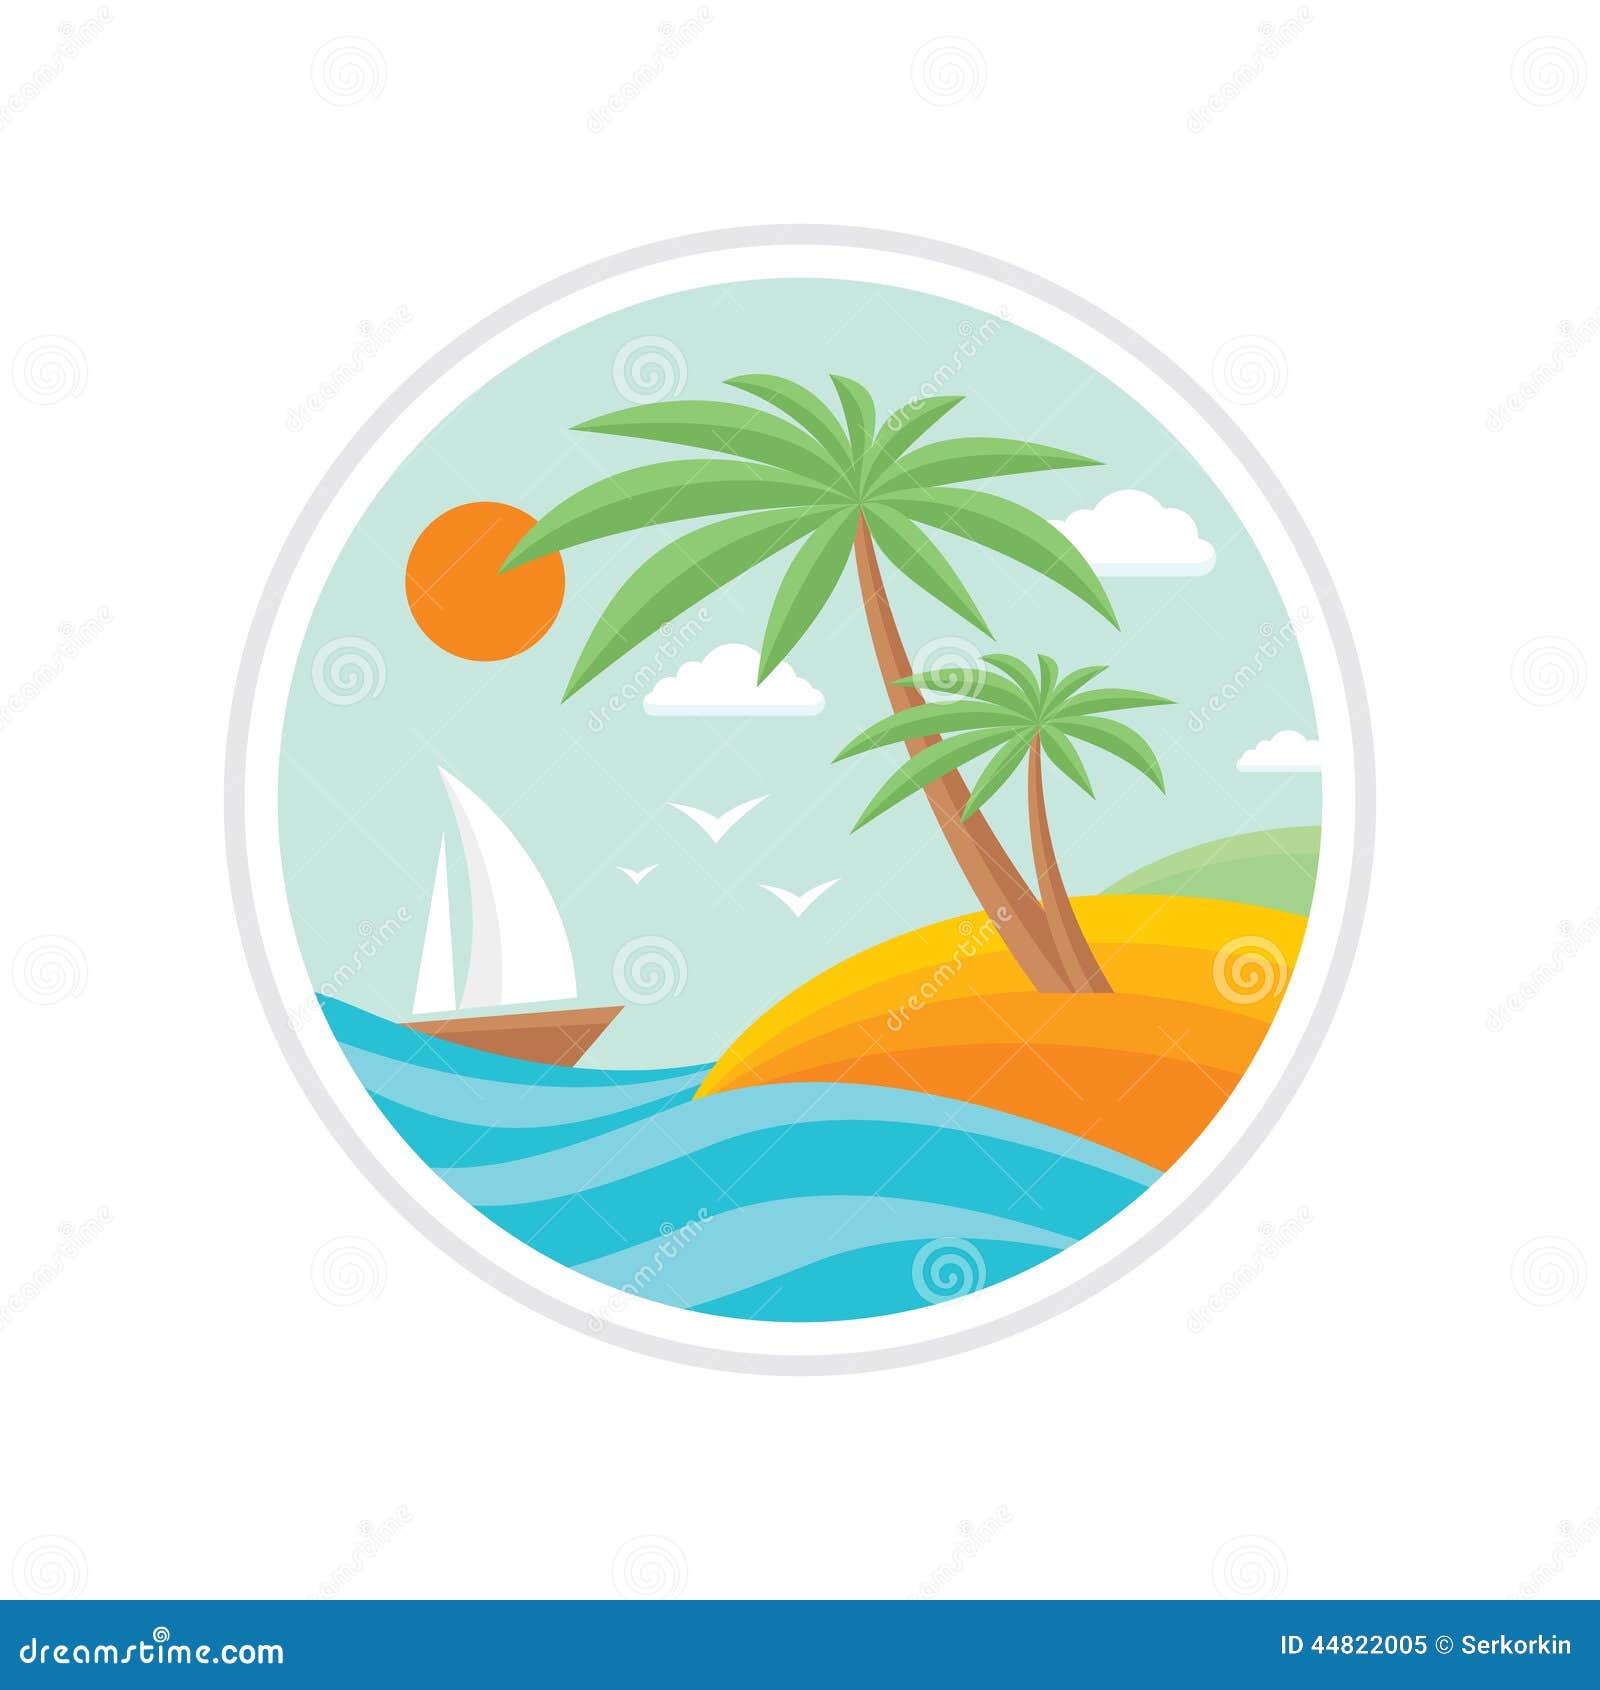 Summer Holiday - Creative Logo Sign In Flat Design Style 